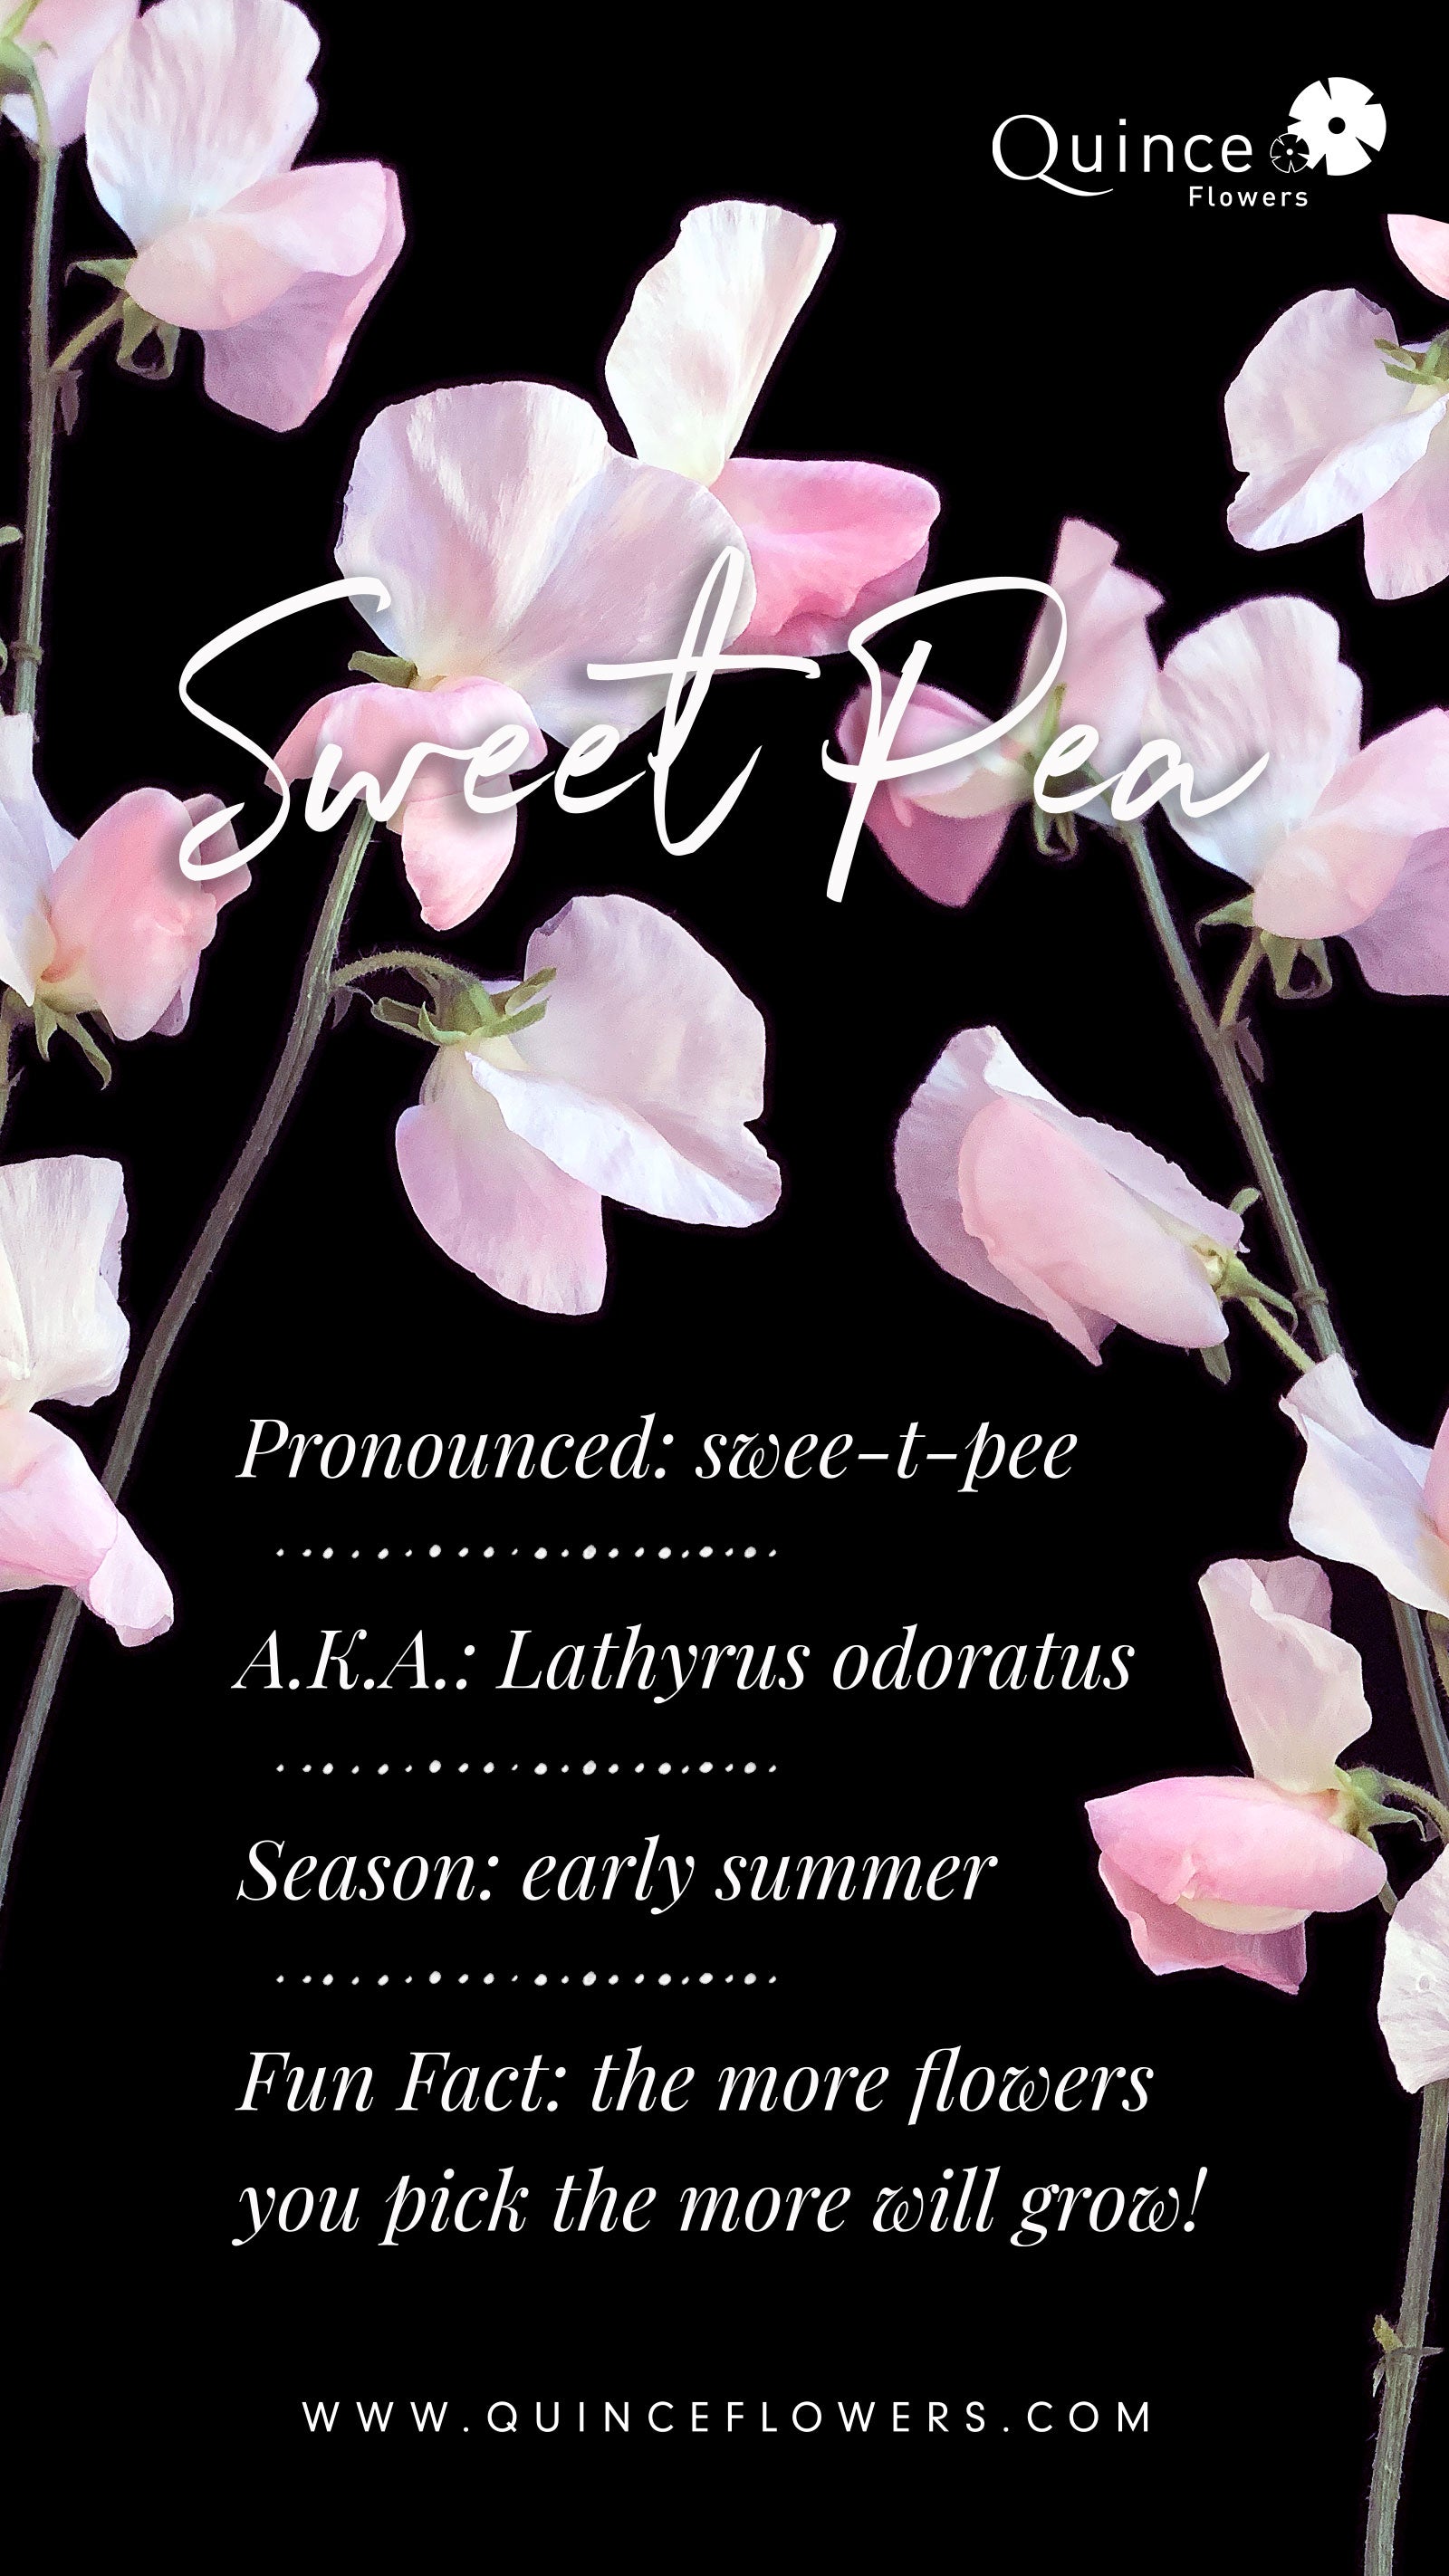 A digital image featuring light pink Sweet Pea flowers against a dark background with the text ‘Sweet Pea’ overlaid in elegant script.Order online for plants & flowers from the best florist in Toronto near you.